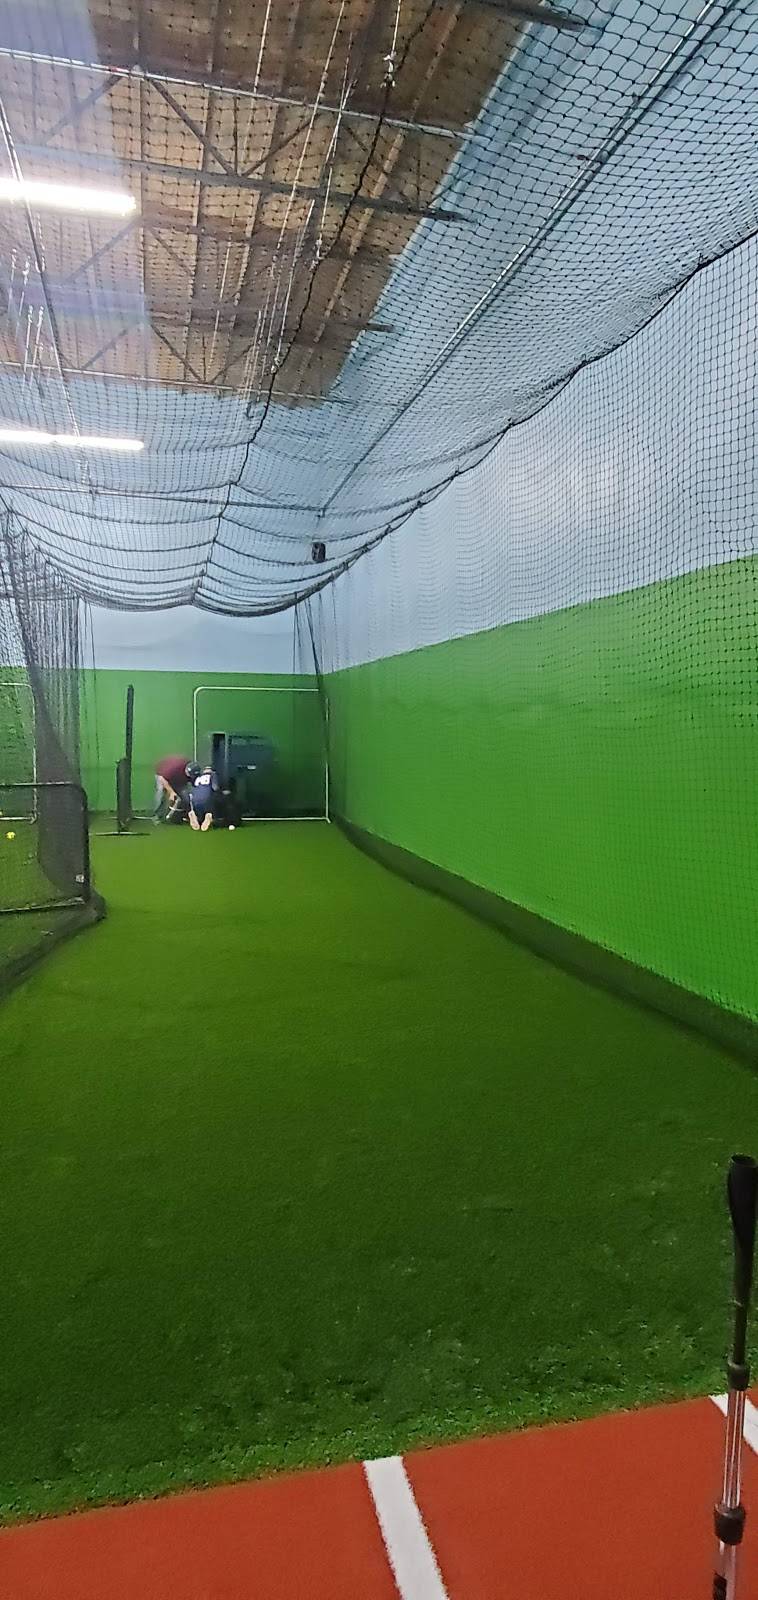 IE Performance Center and Batting Cages - gym  | Photo 1 of 6 | Address: 701 S Gifford Ave Suite 105, San Bernardino, CA 92408, USA | Phone: (909) 381-0056